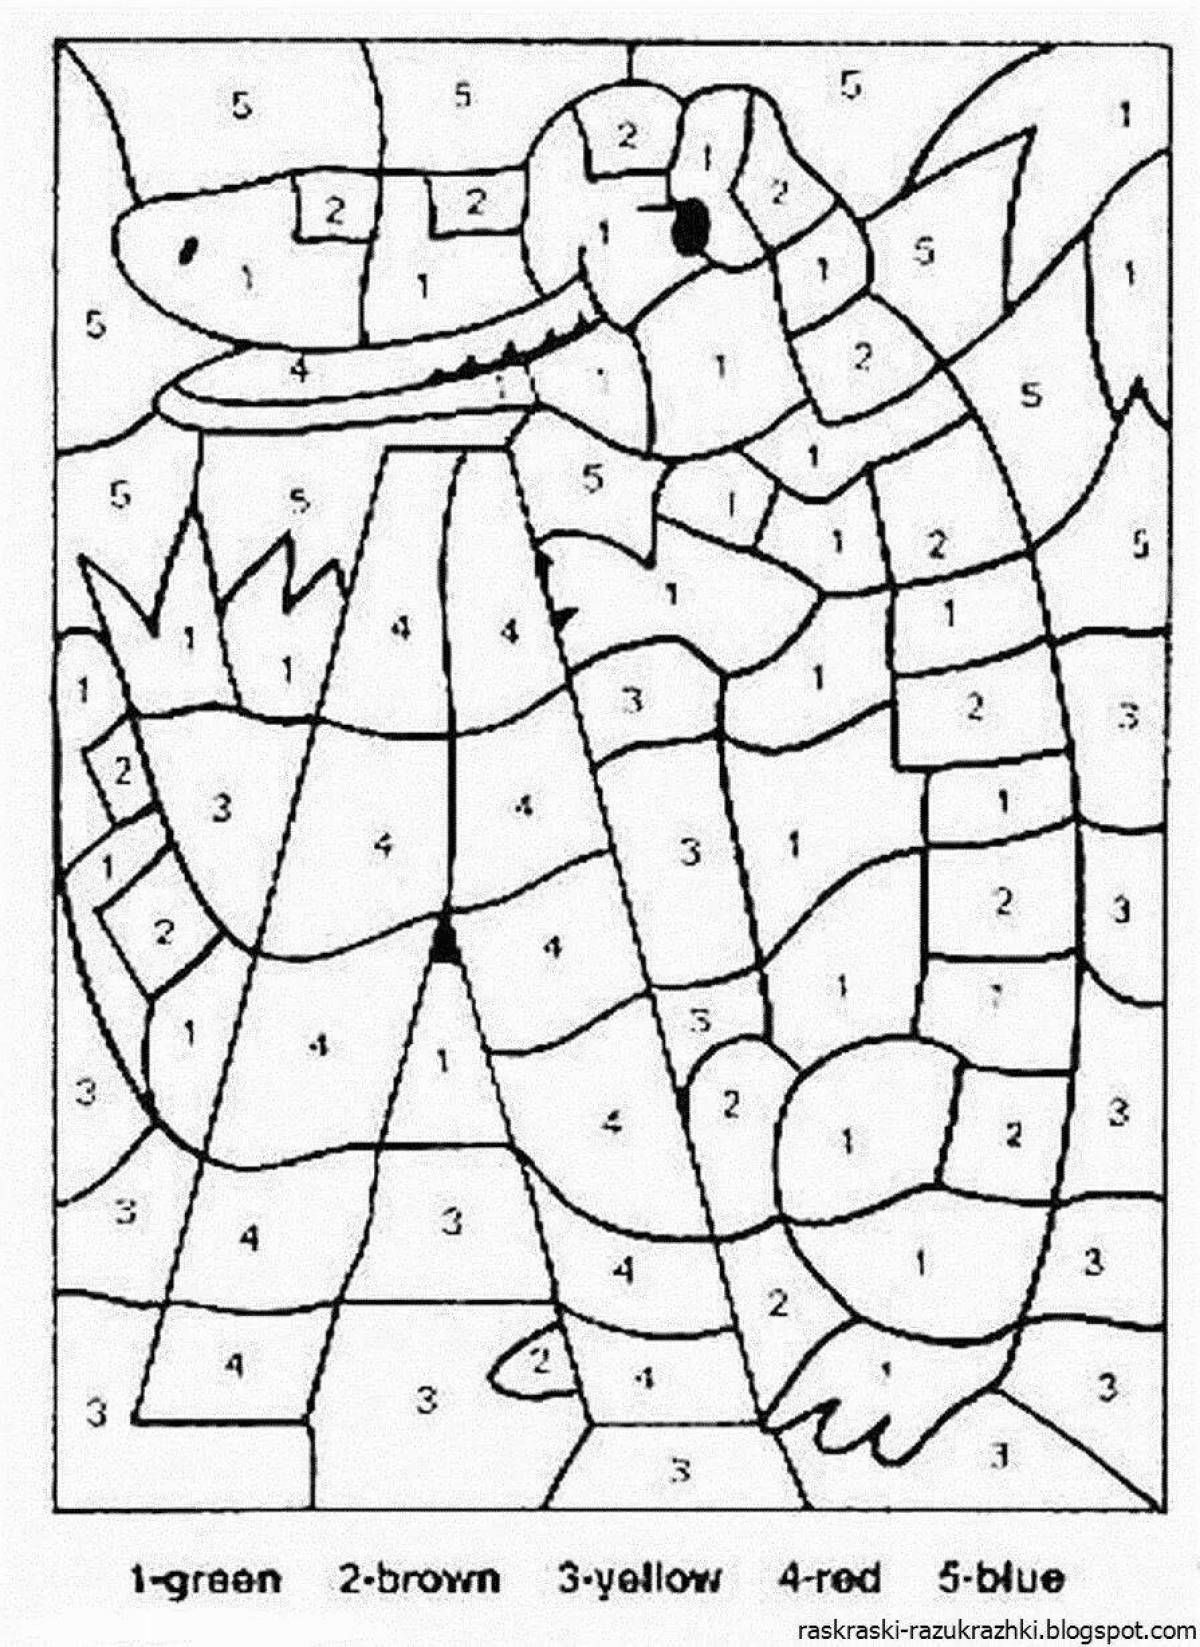 Coloring by number of squares